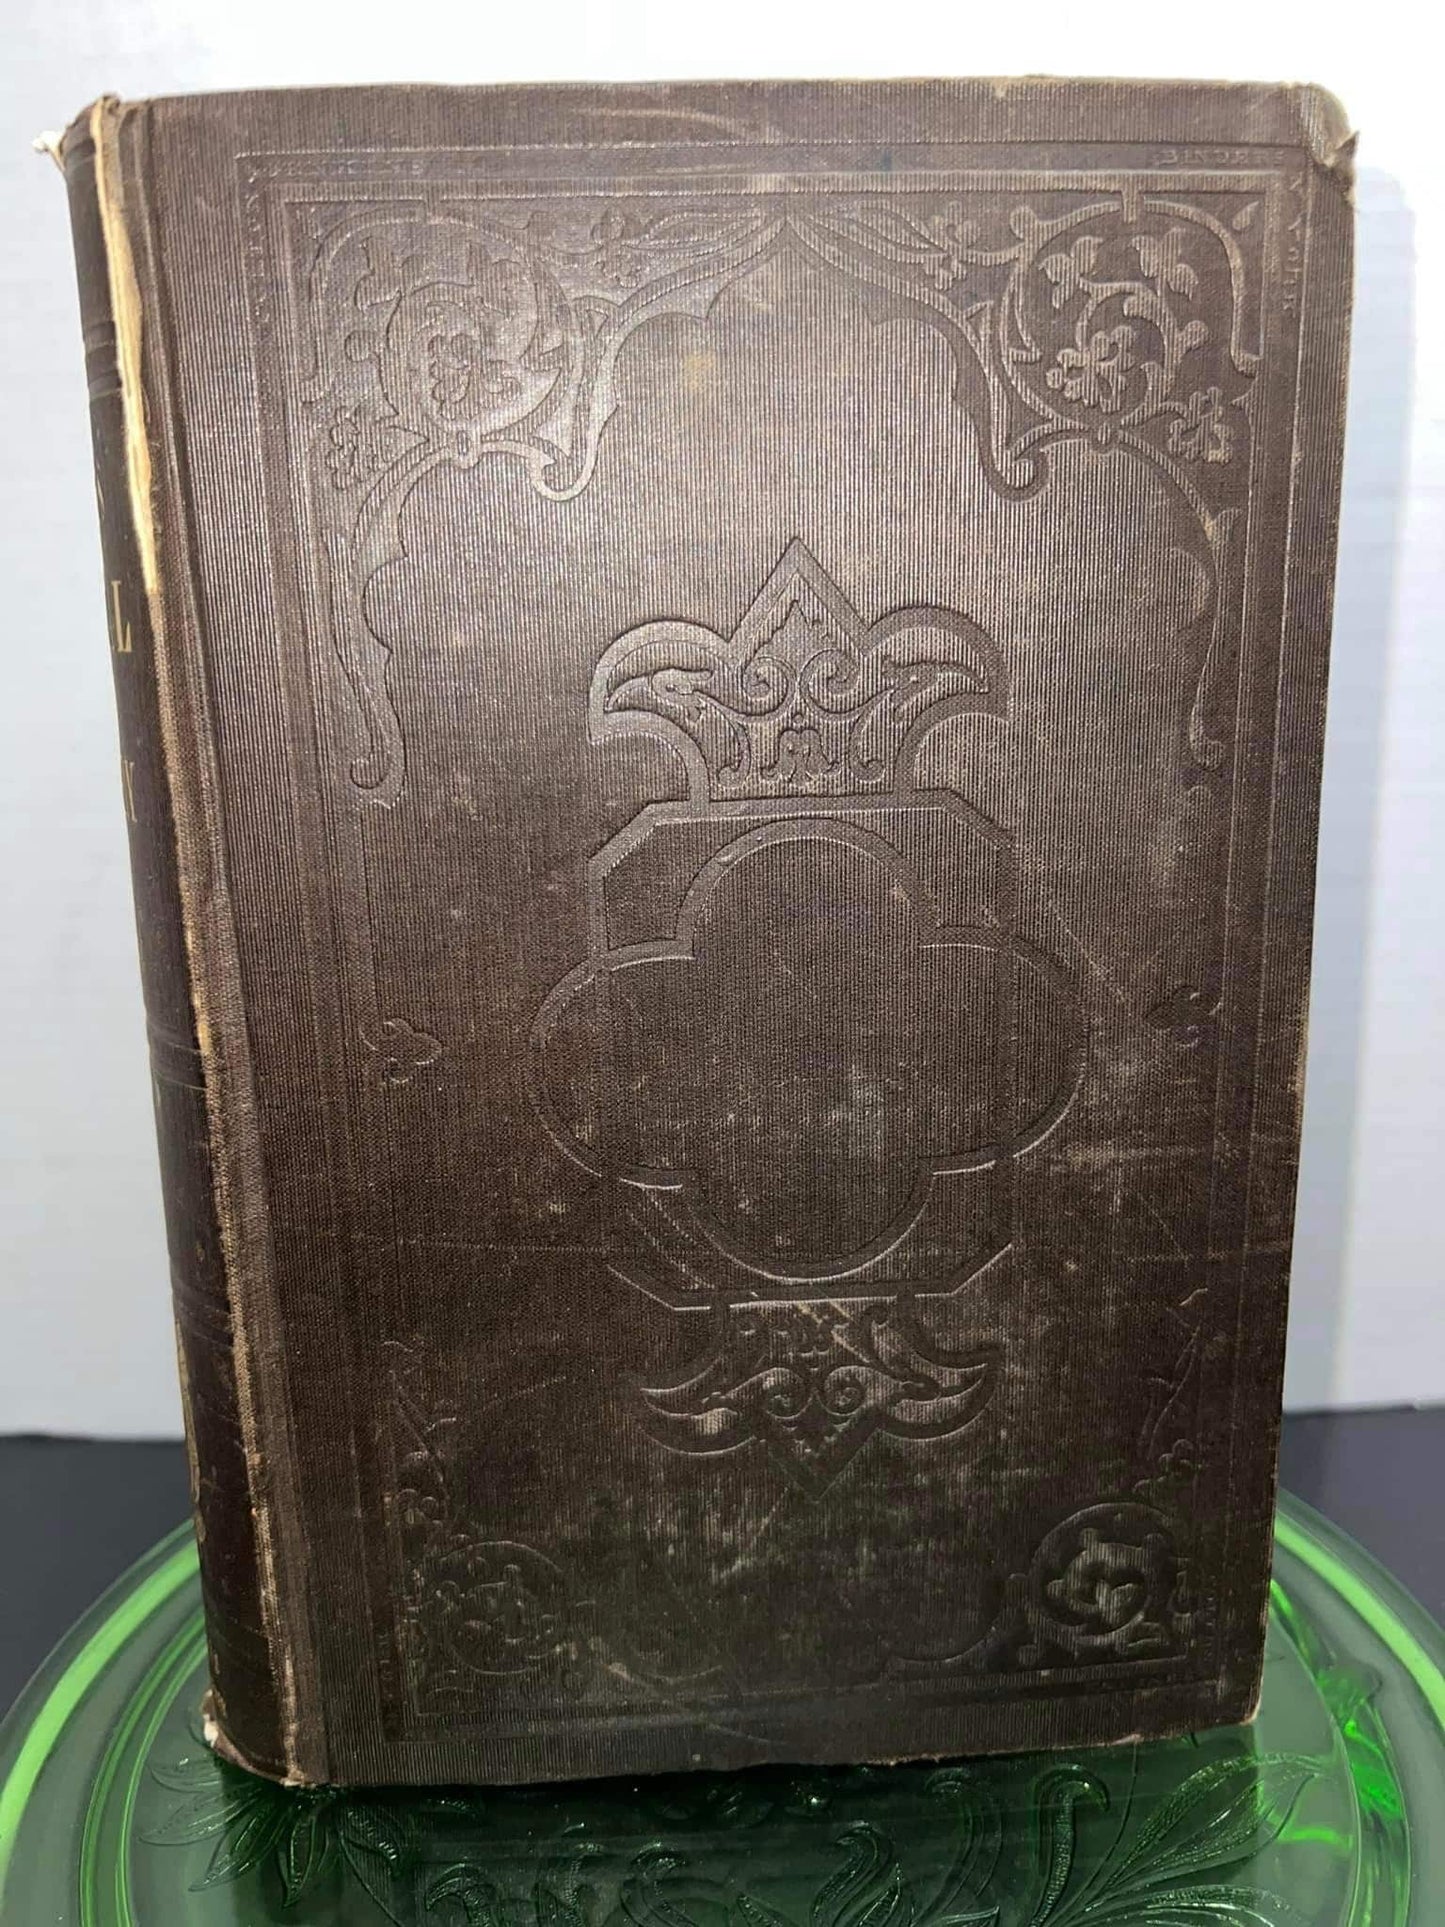 Antique history 1846 A manual of ancient and modern history From Rome/Egypt to colonization